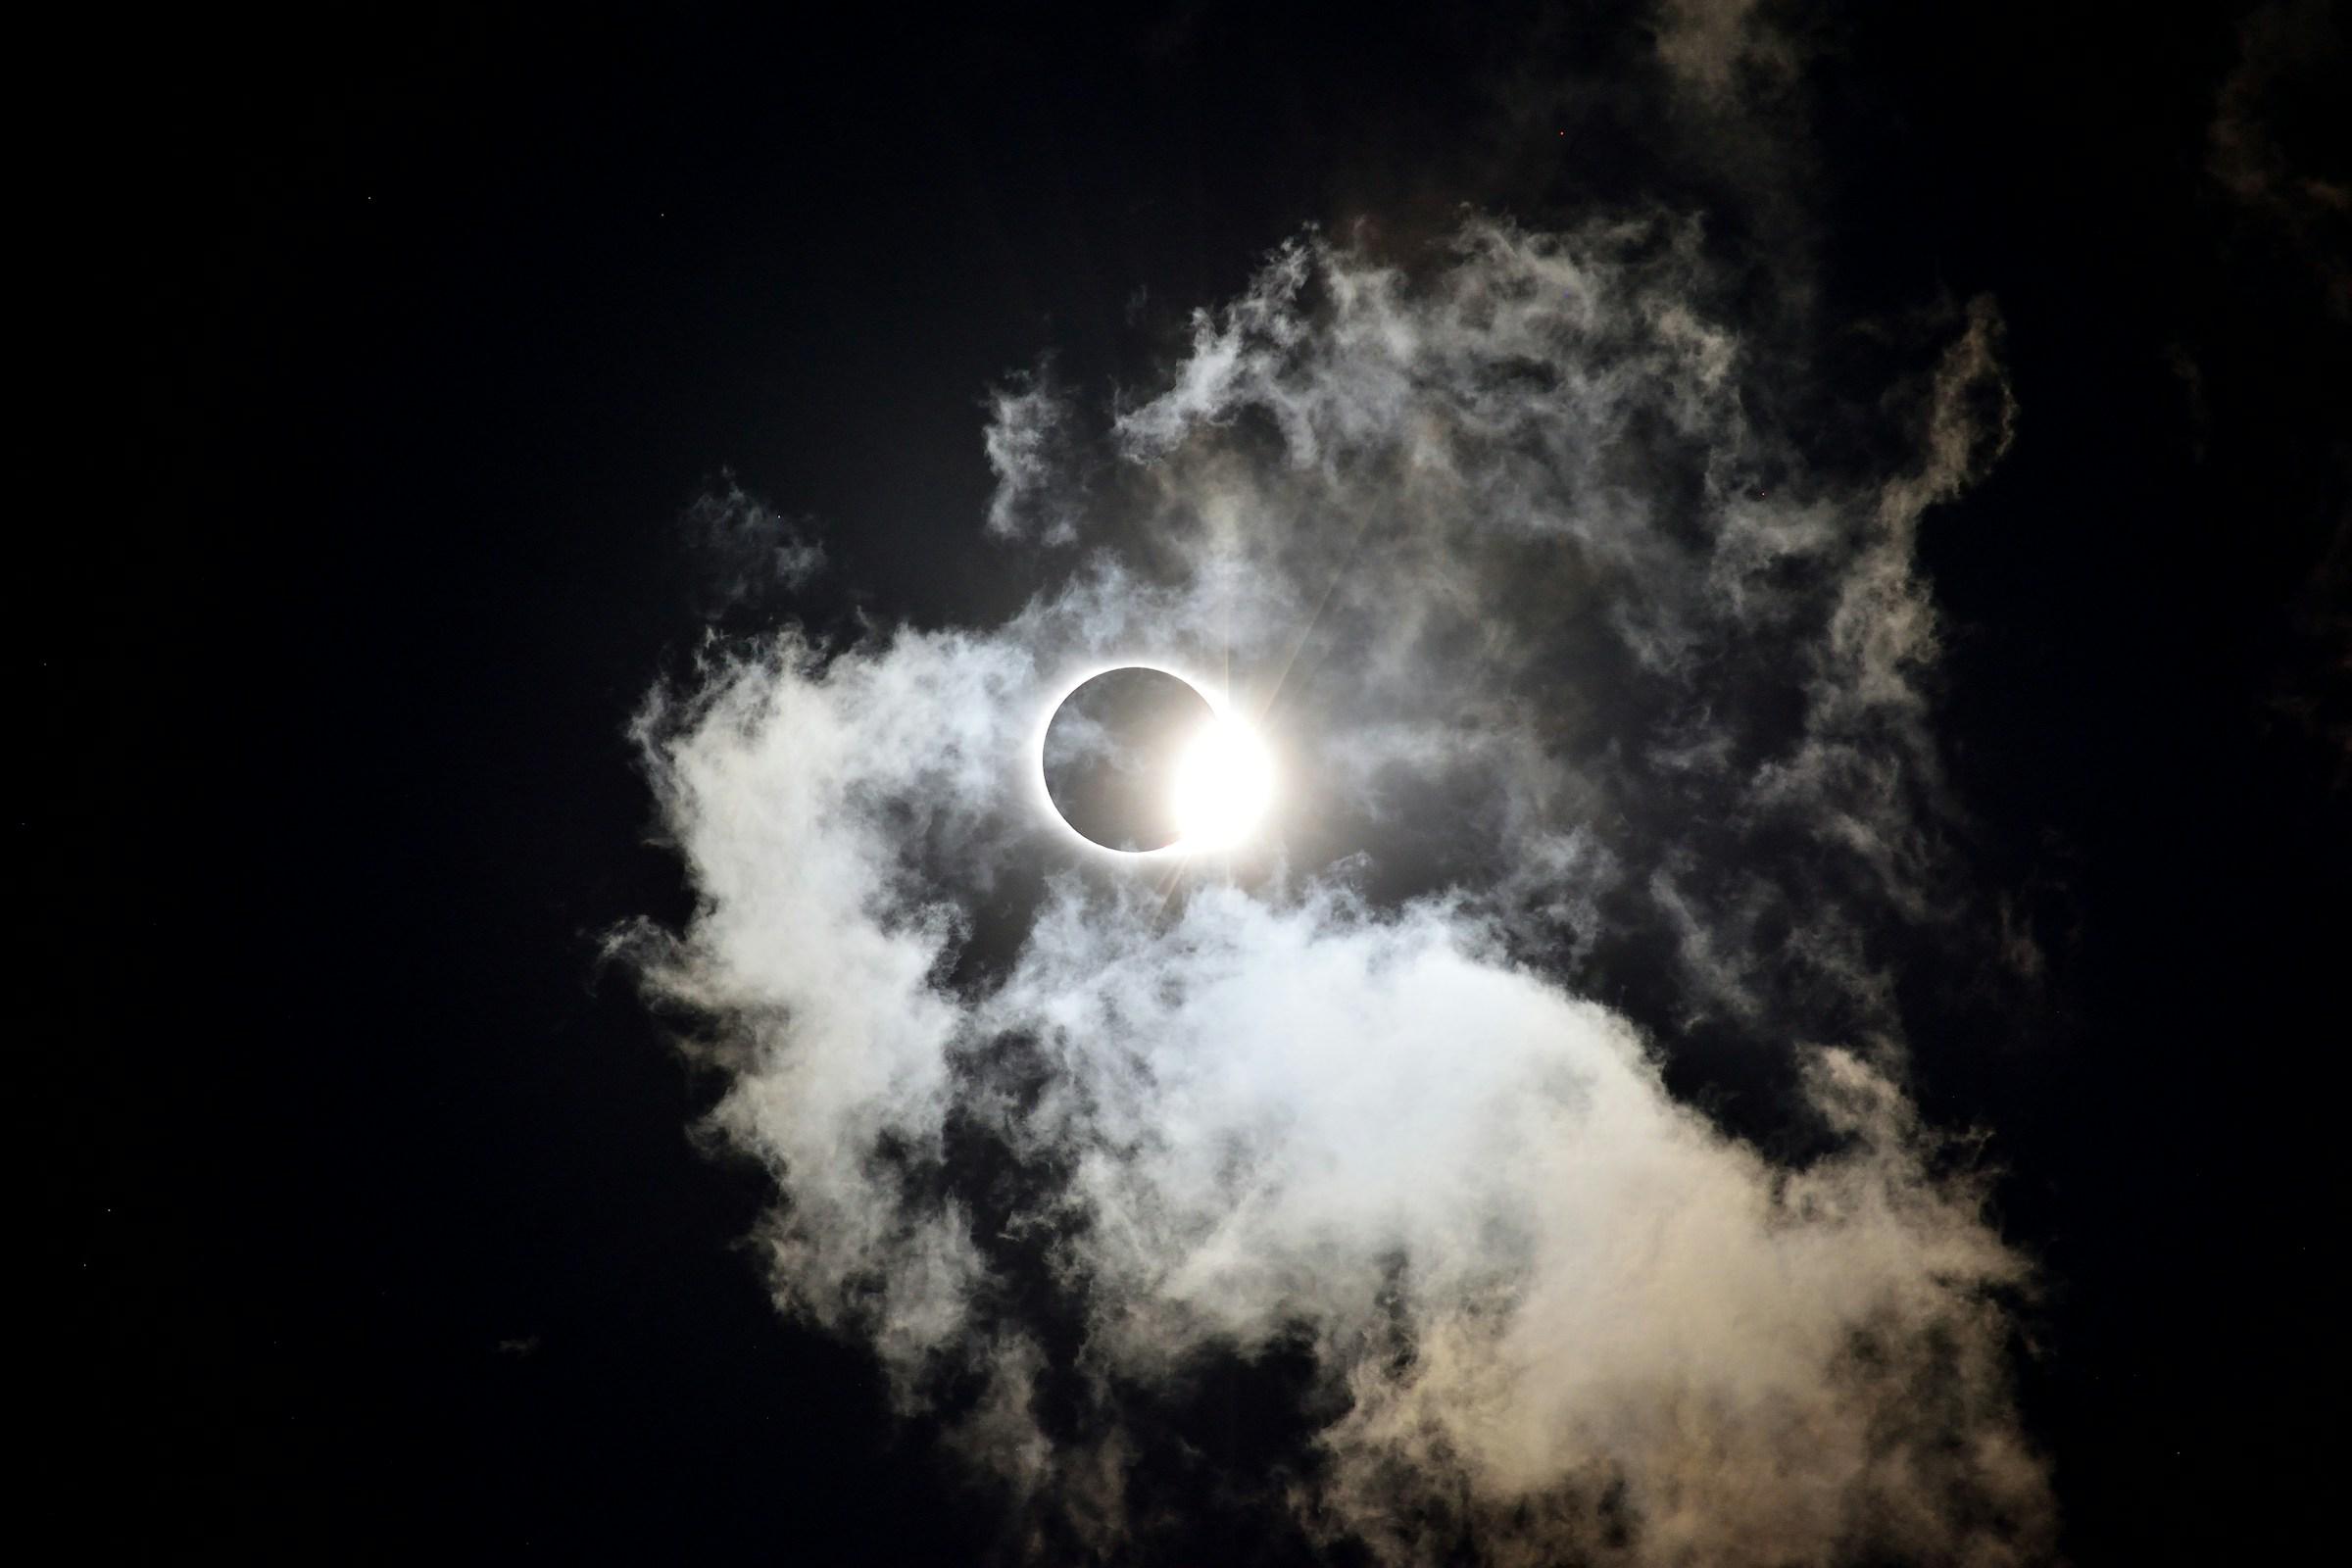 Image of a solar eclipse with clouds